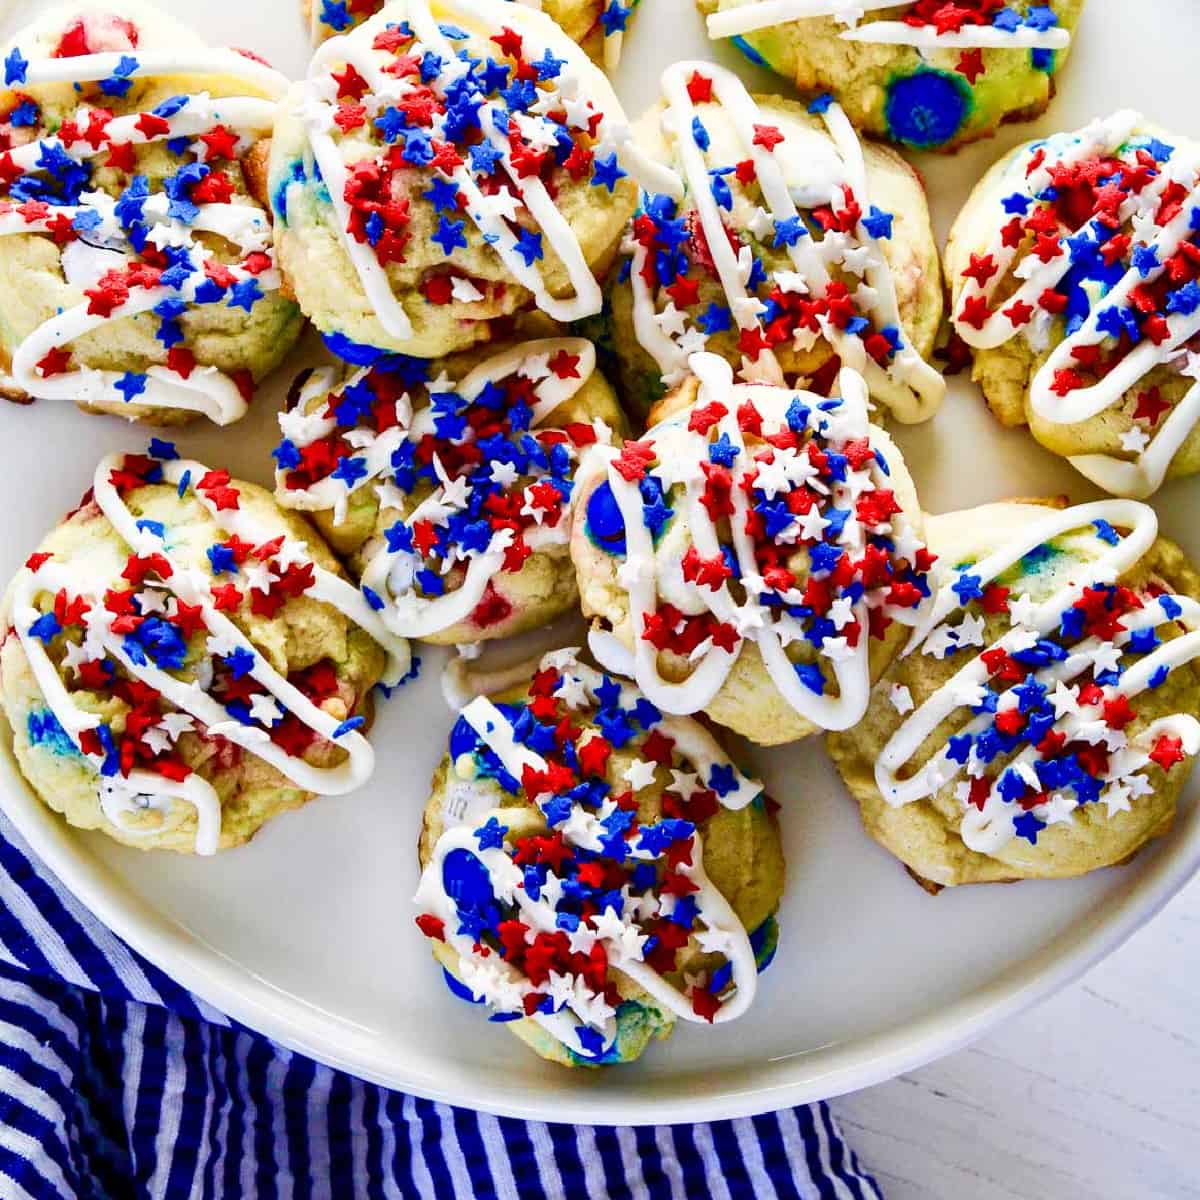 A white plate filled with July 4th red white and blue cookies with icing and star sprinkles.